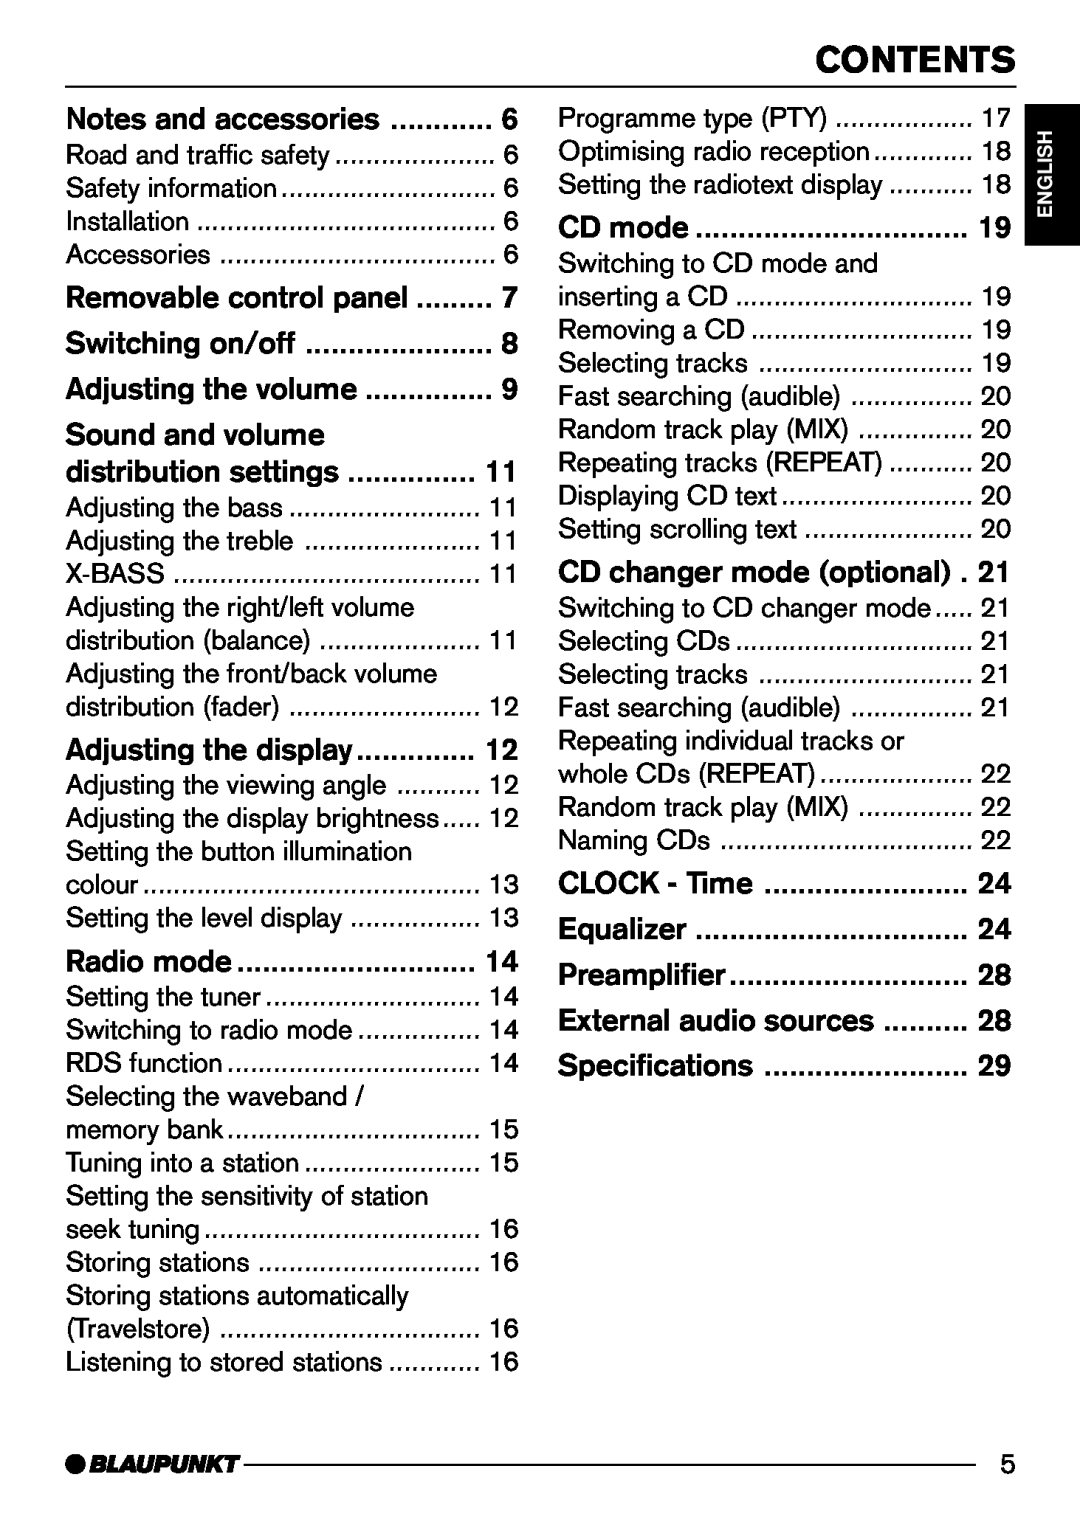 Blaupunkt CD74, CD73 operating instructions Contents, Sound and volume 